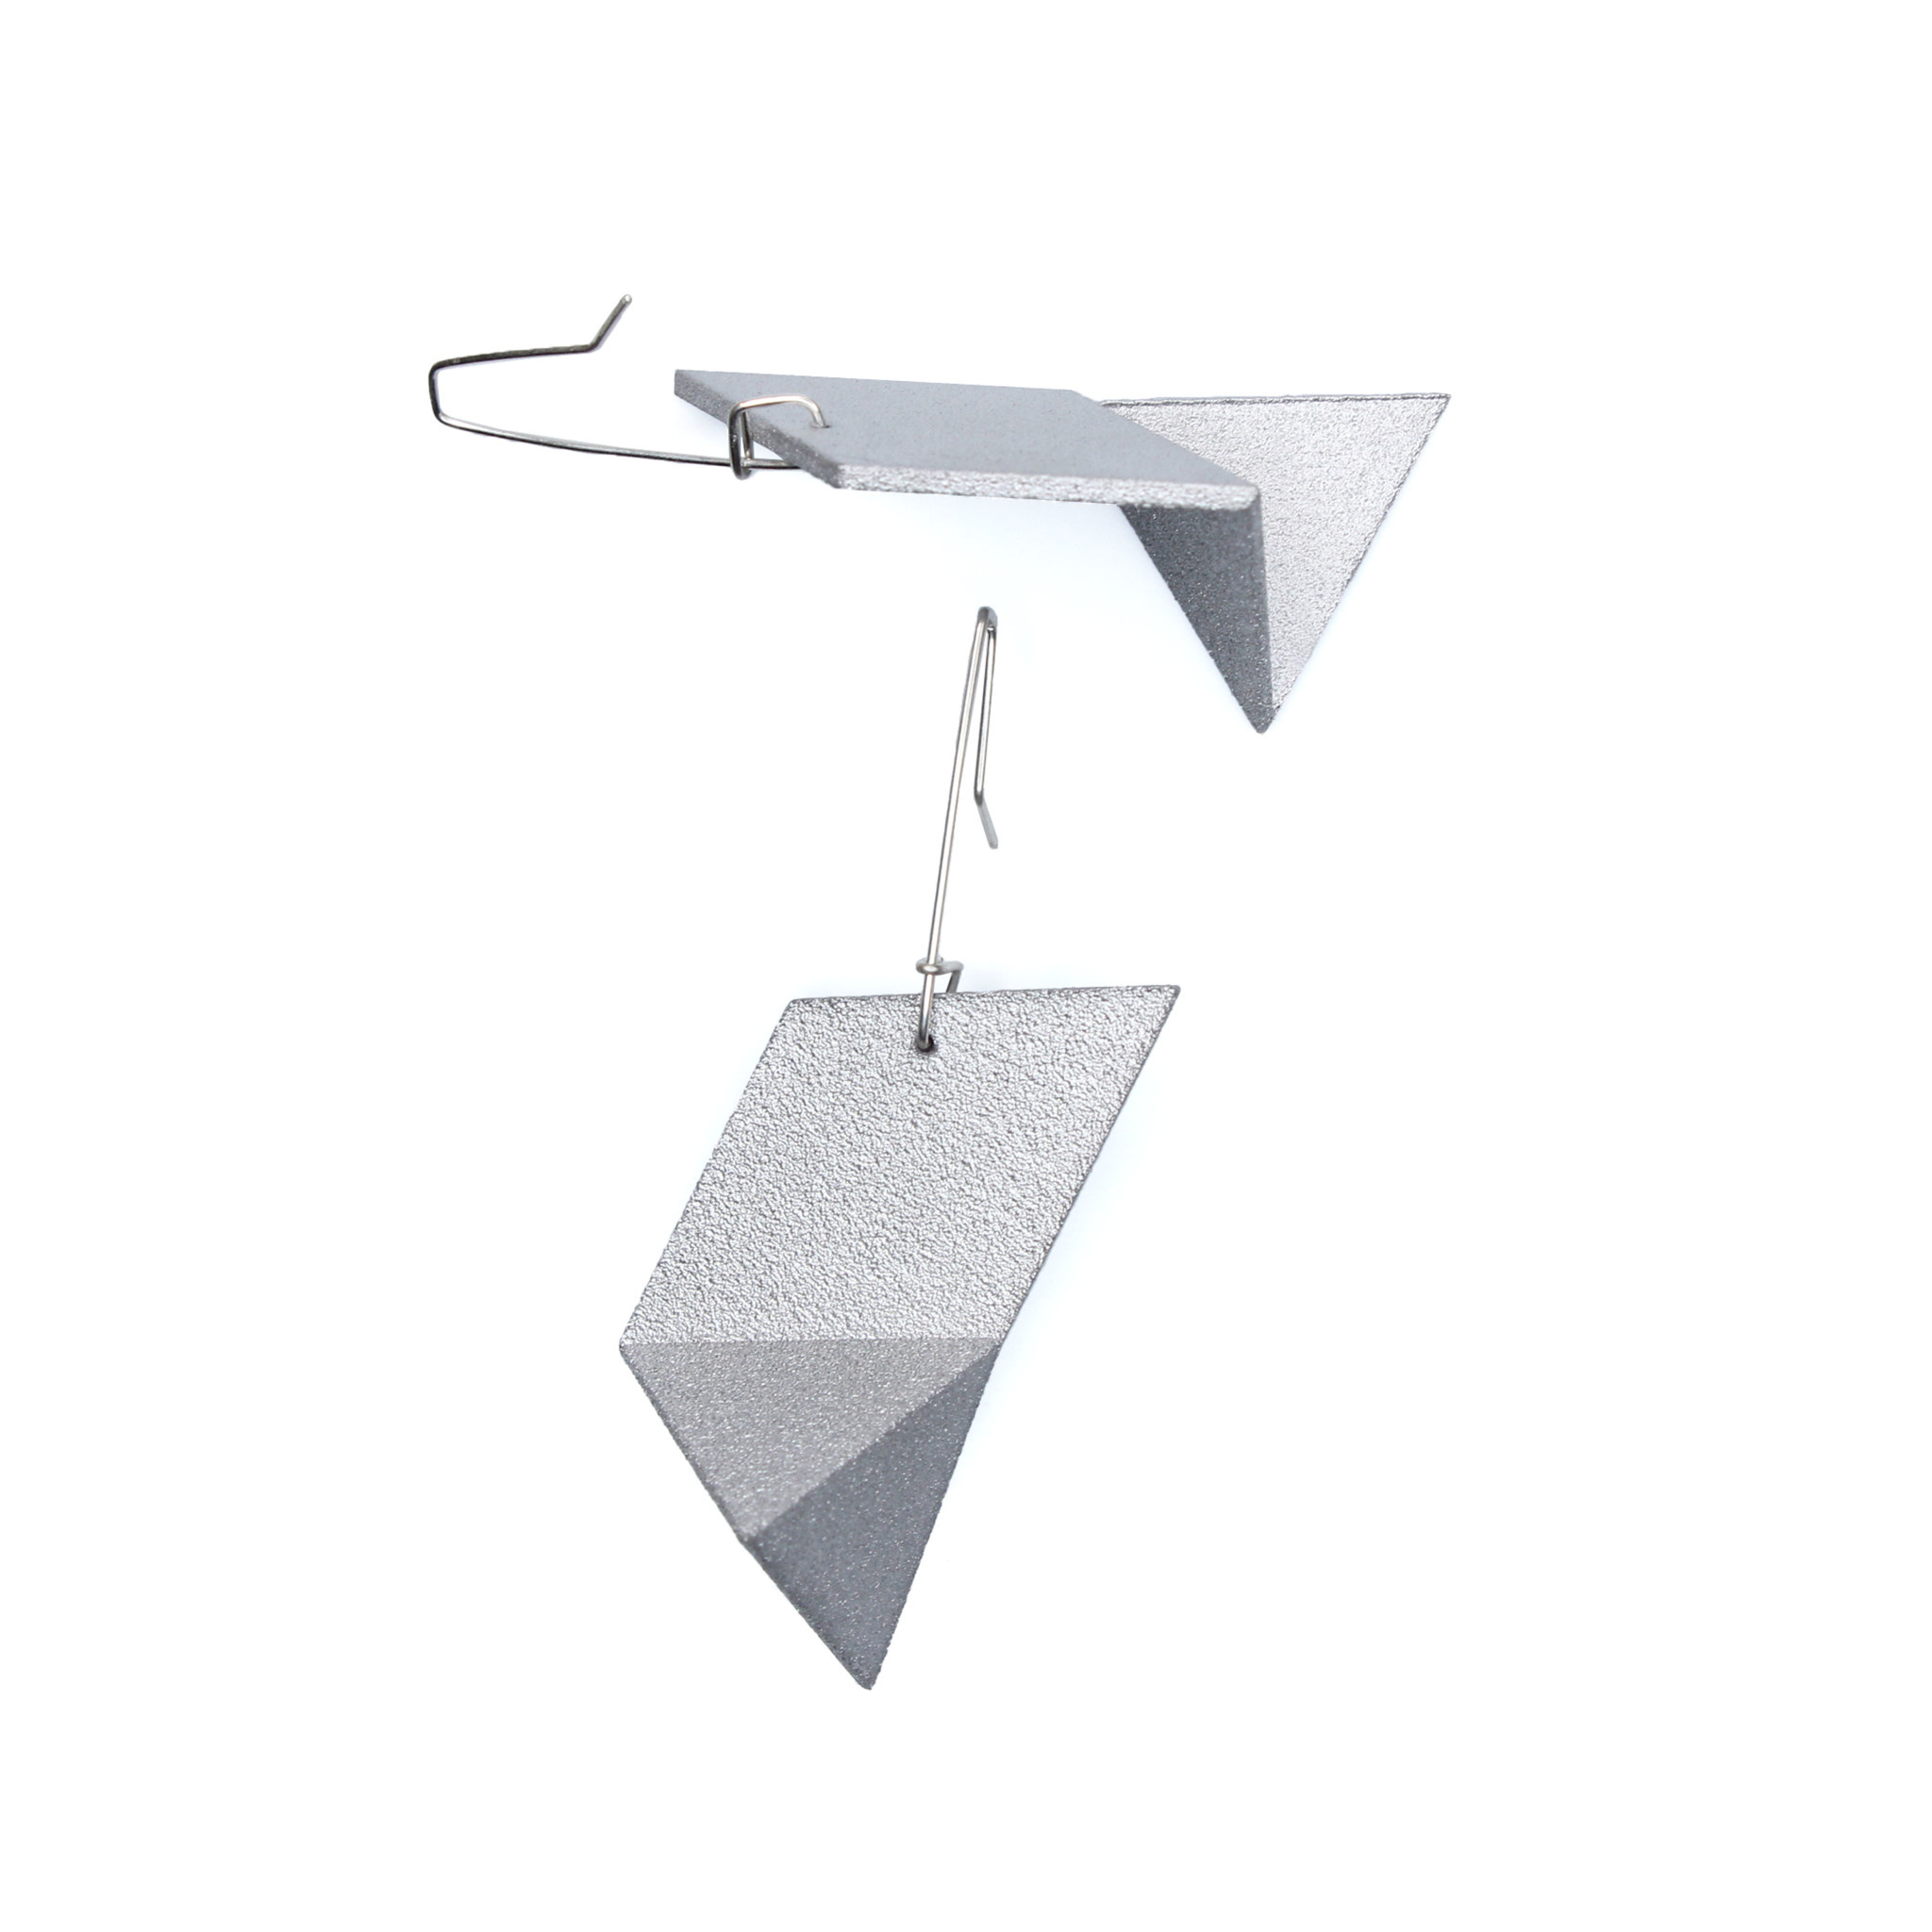 Design + Conquer Earrings - Racer Earrings - Silver